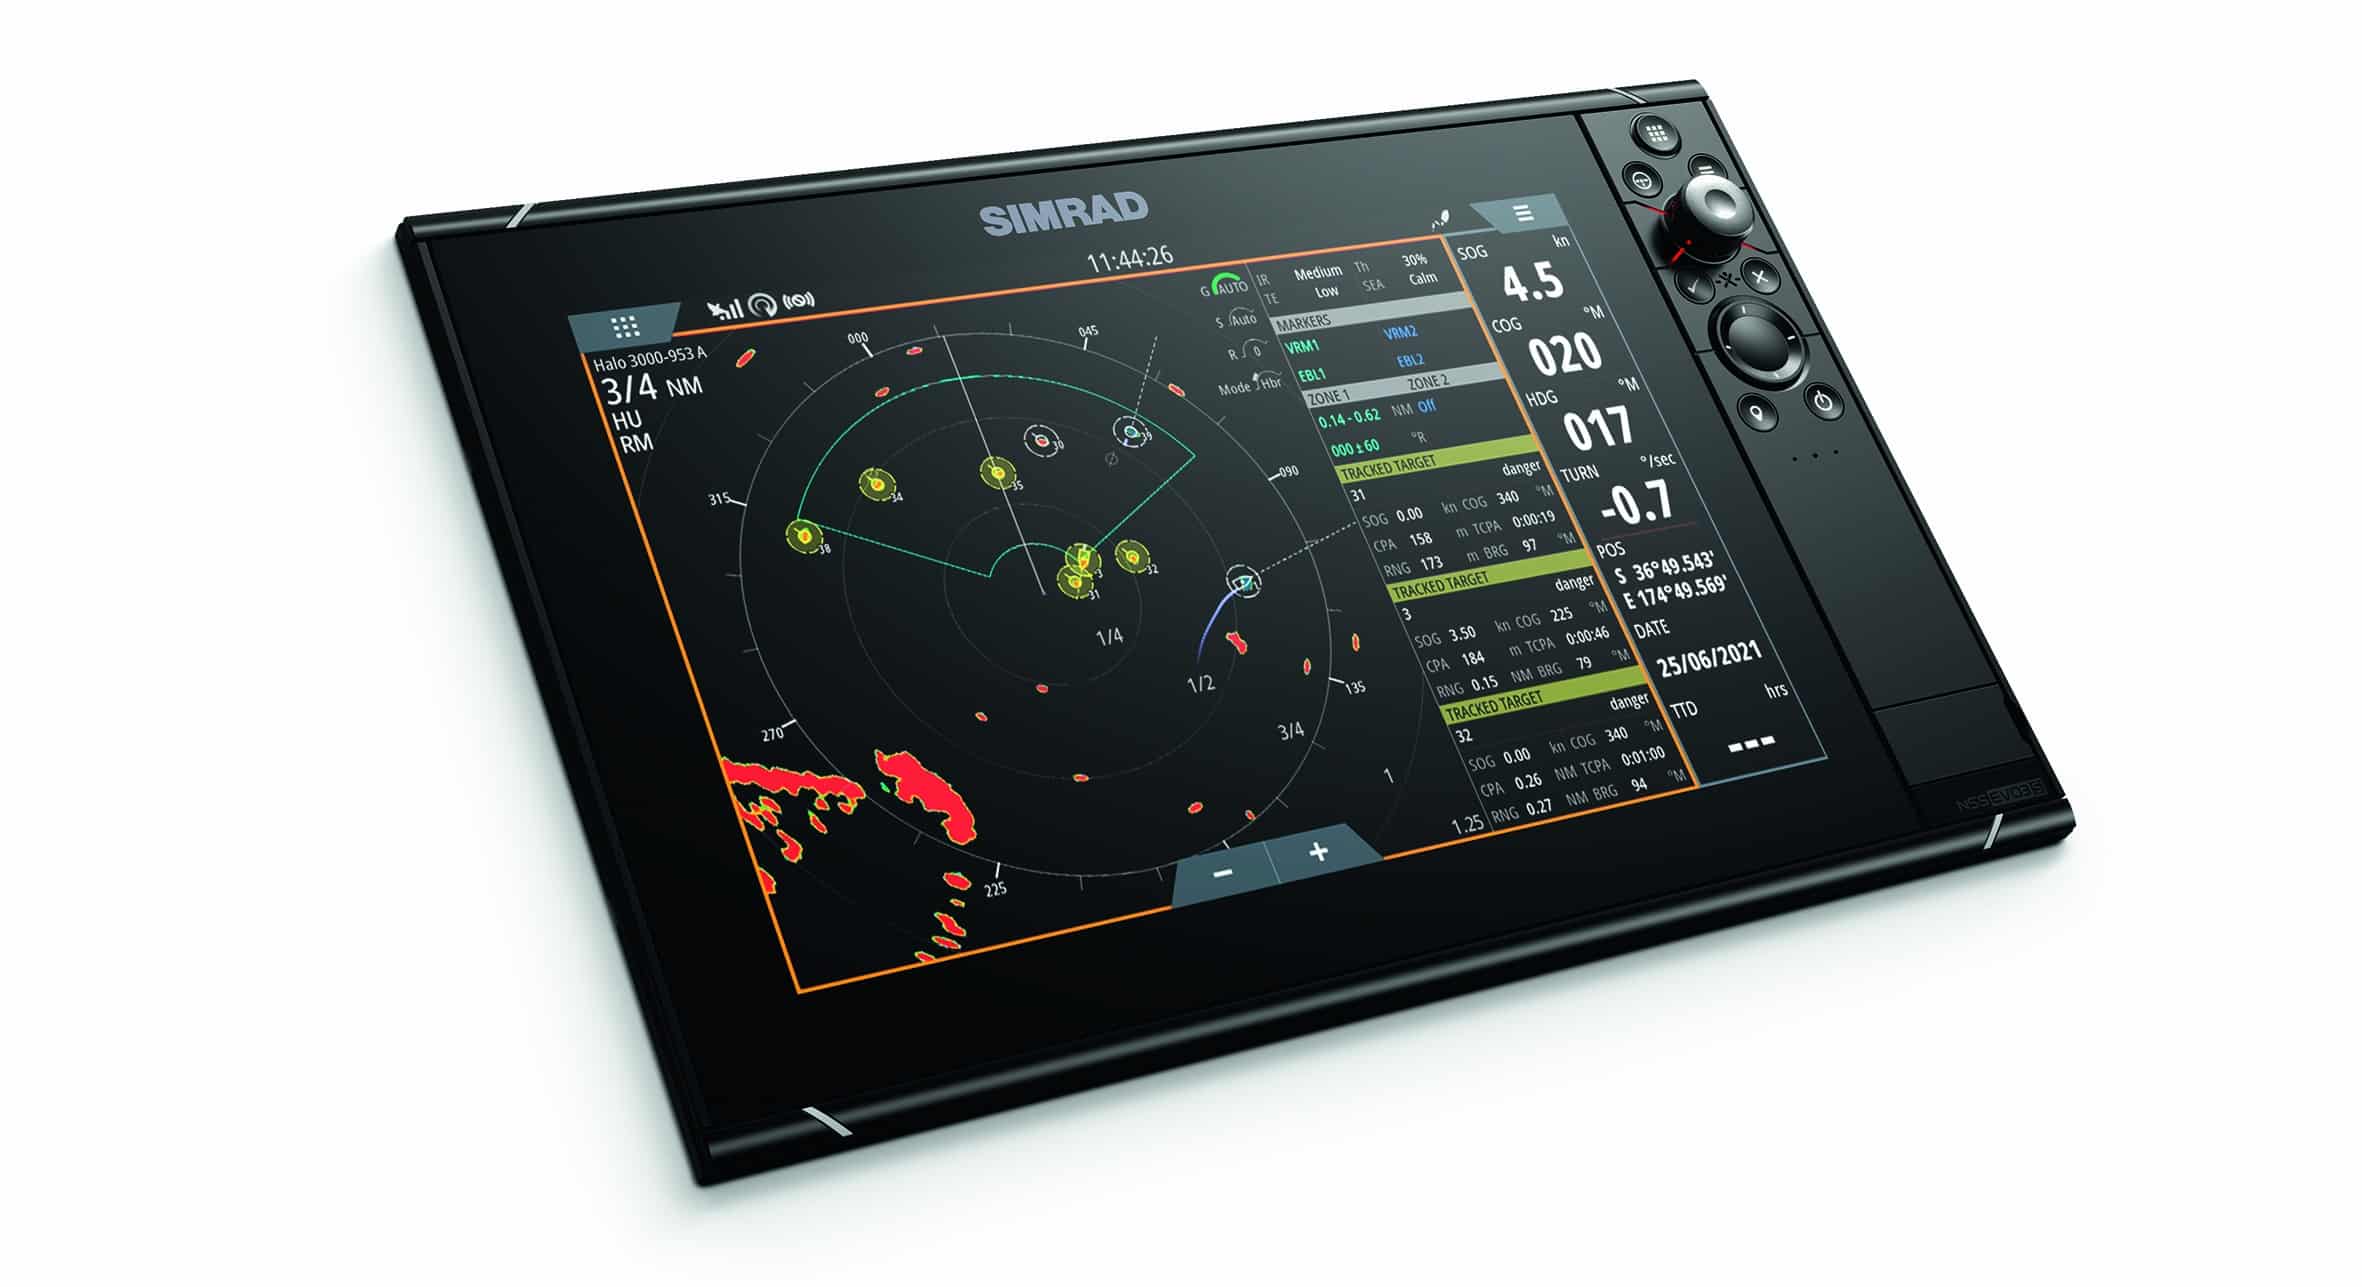 Simrad HALO Radar - Situational awareness can be closely focused when needed.